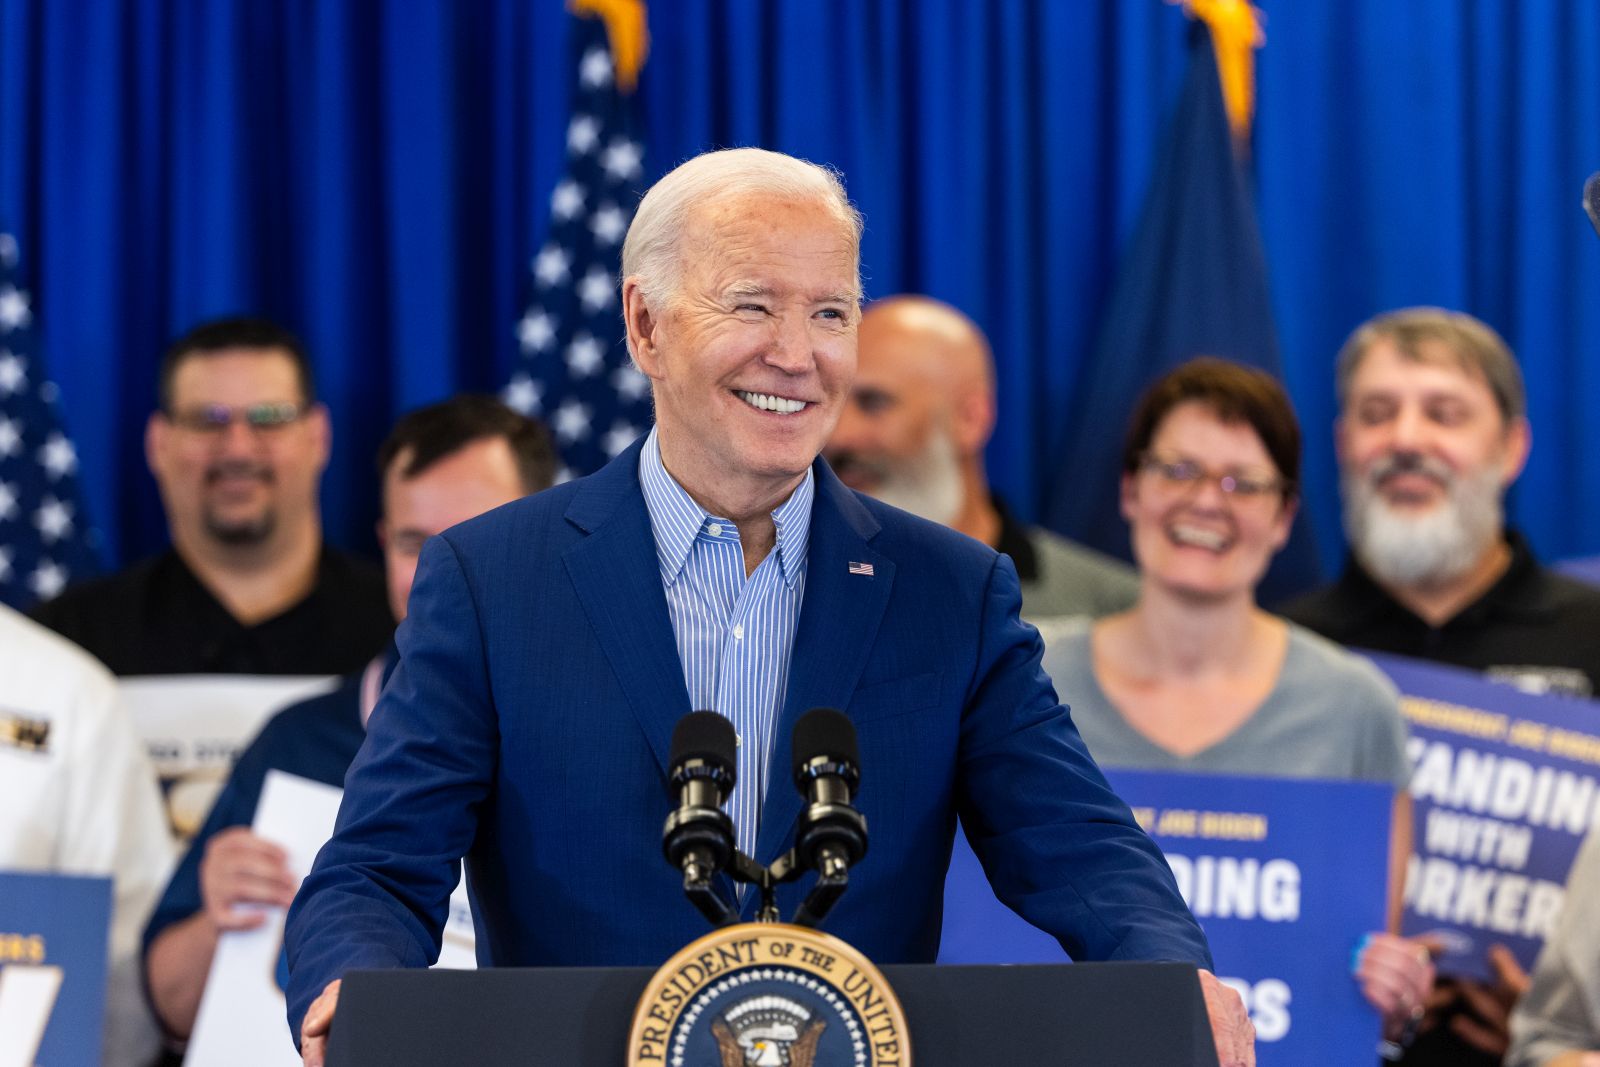 epa11285193 US President Joe Biden calls for tripling tariffs on Chinese steel imports while speaking at the United Steel Workers Headquarters in Pittsburgh, Pennsylvania, USA, 17 April 2024. He also repeatedly attacked his Republican rival for the presidency, Donald Trump. Biden is on the second day of a three-day swing through the swing-state of Pennsylvania, with additional stops in Scranton and Philadelphia.  EPA/JIM LO SCALZO